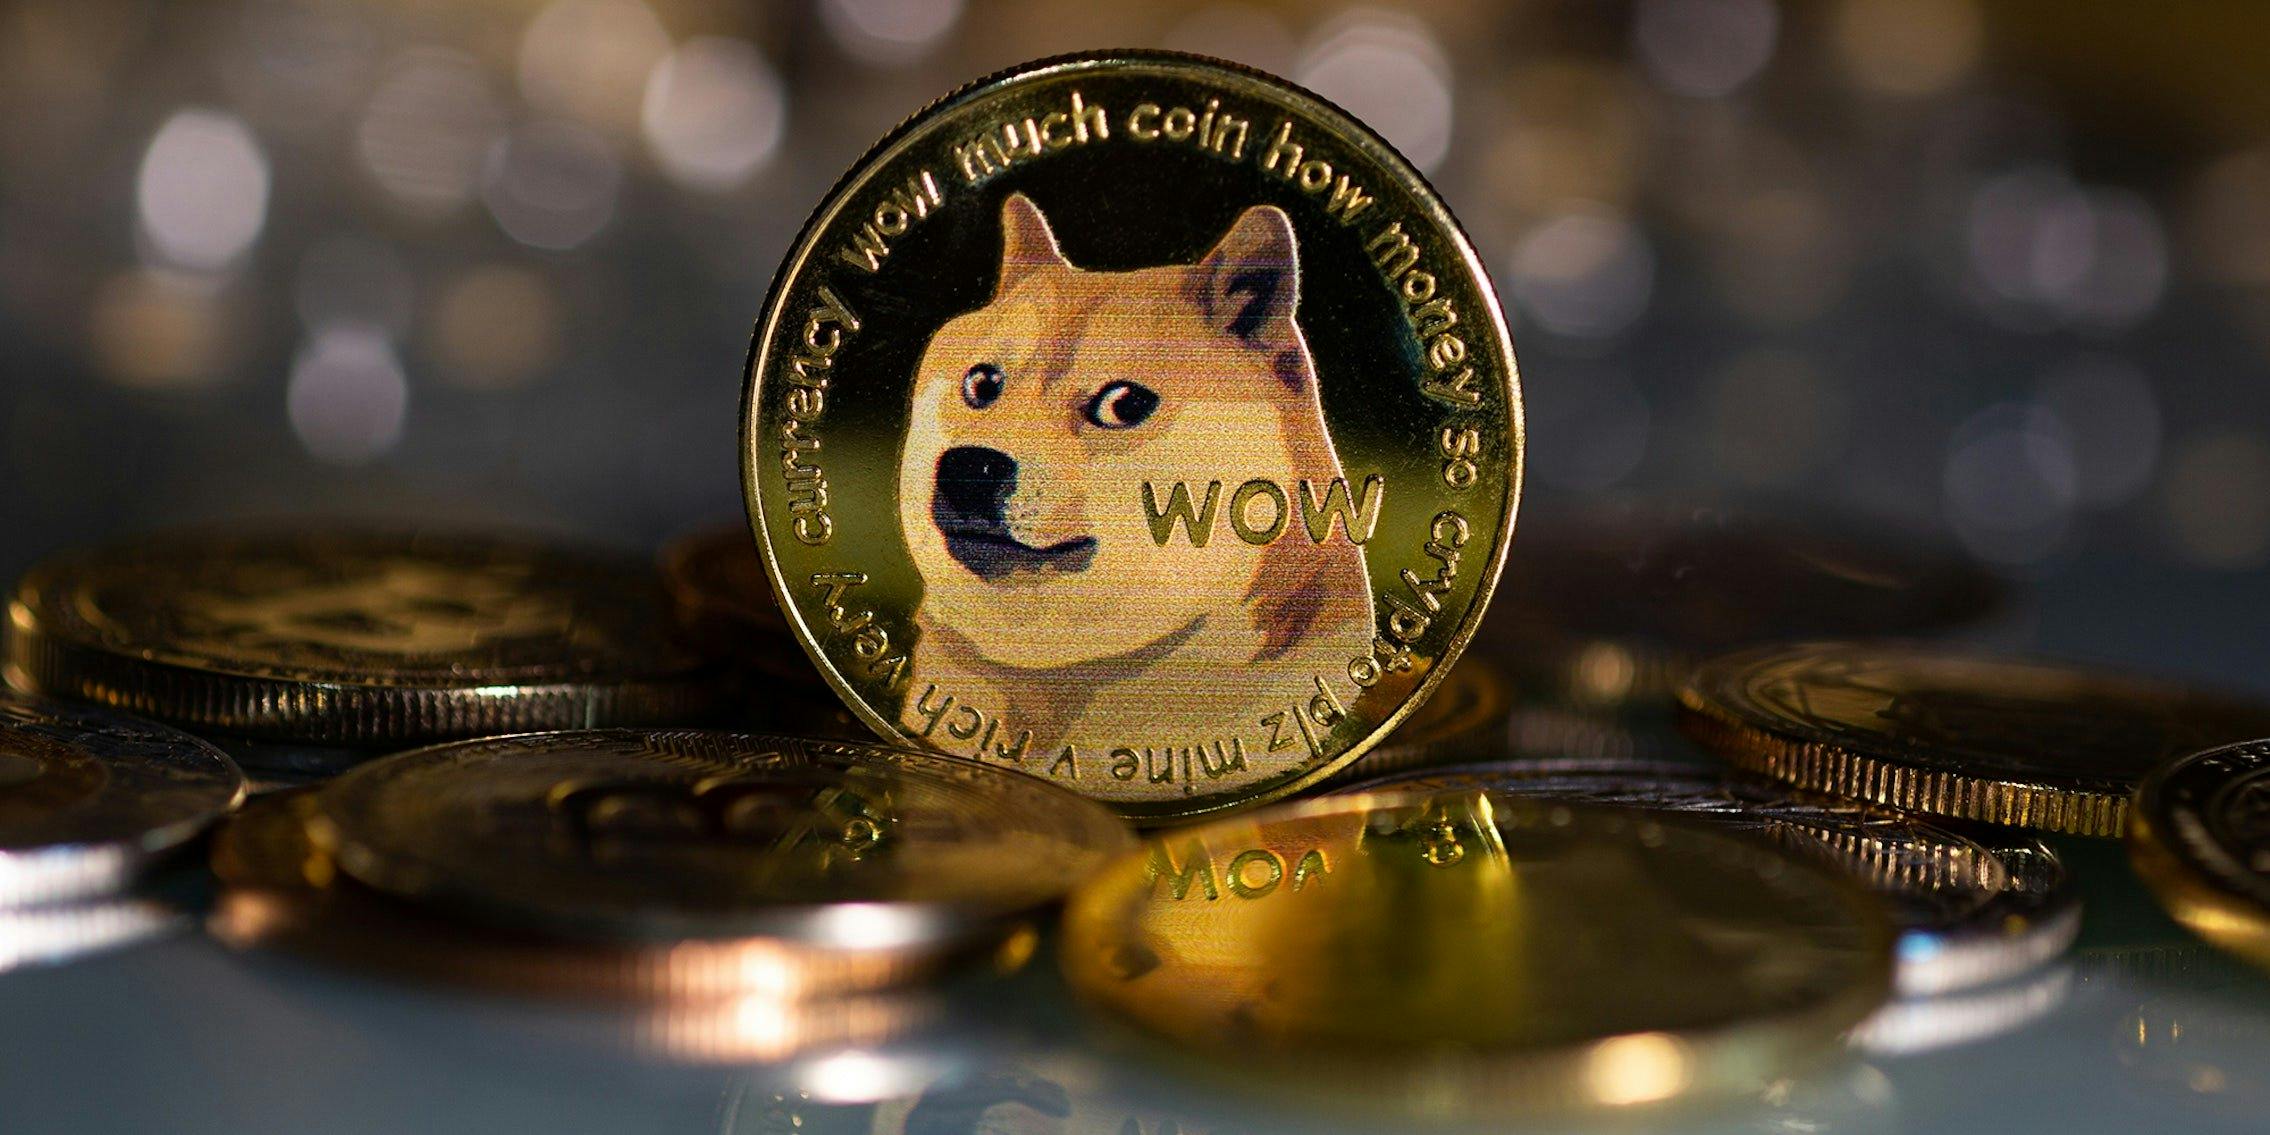 Did Elon Musk change the Twitter logo to distract from his Dogecoin lawsuit?